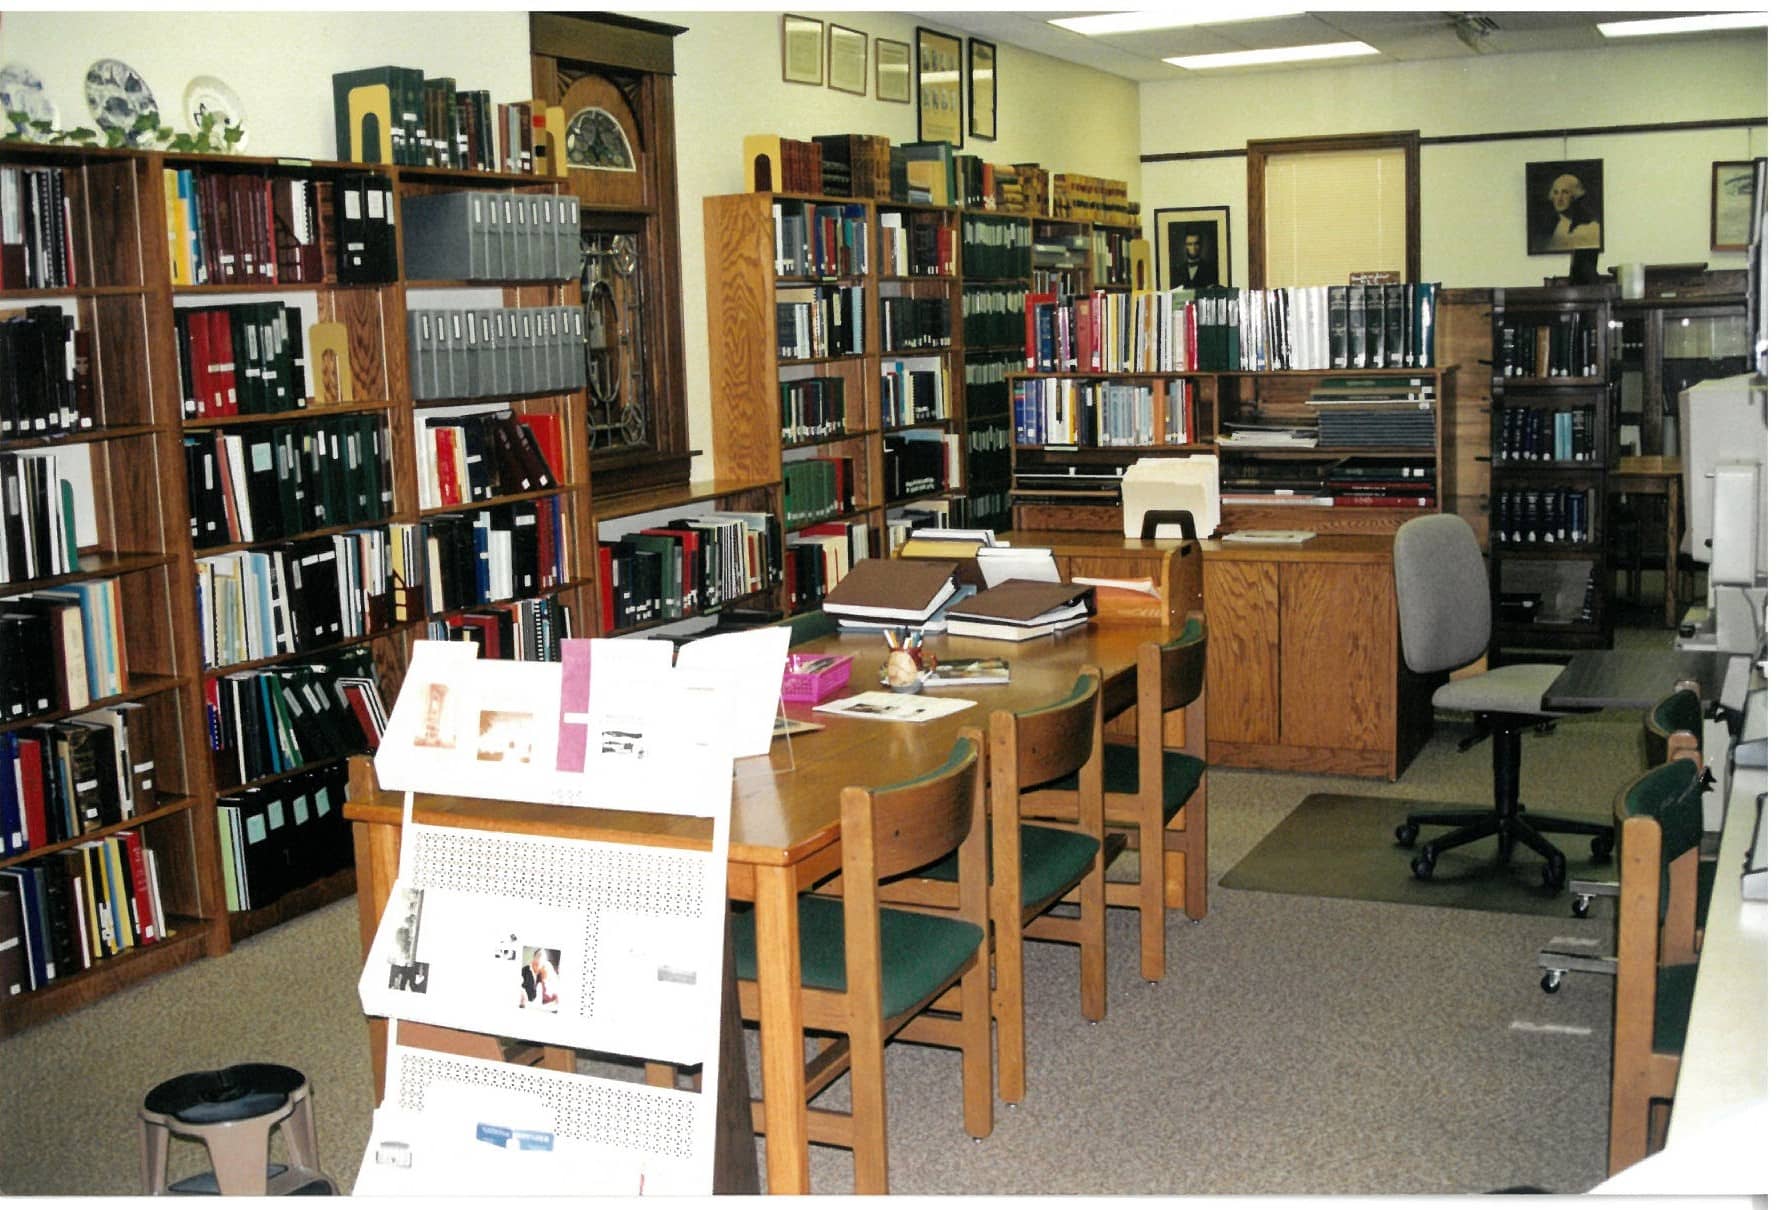 Local History Room books on shelves, tables and chairs, 